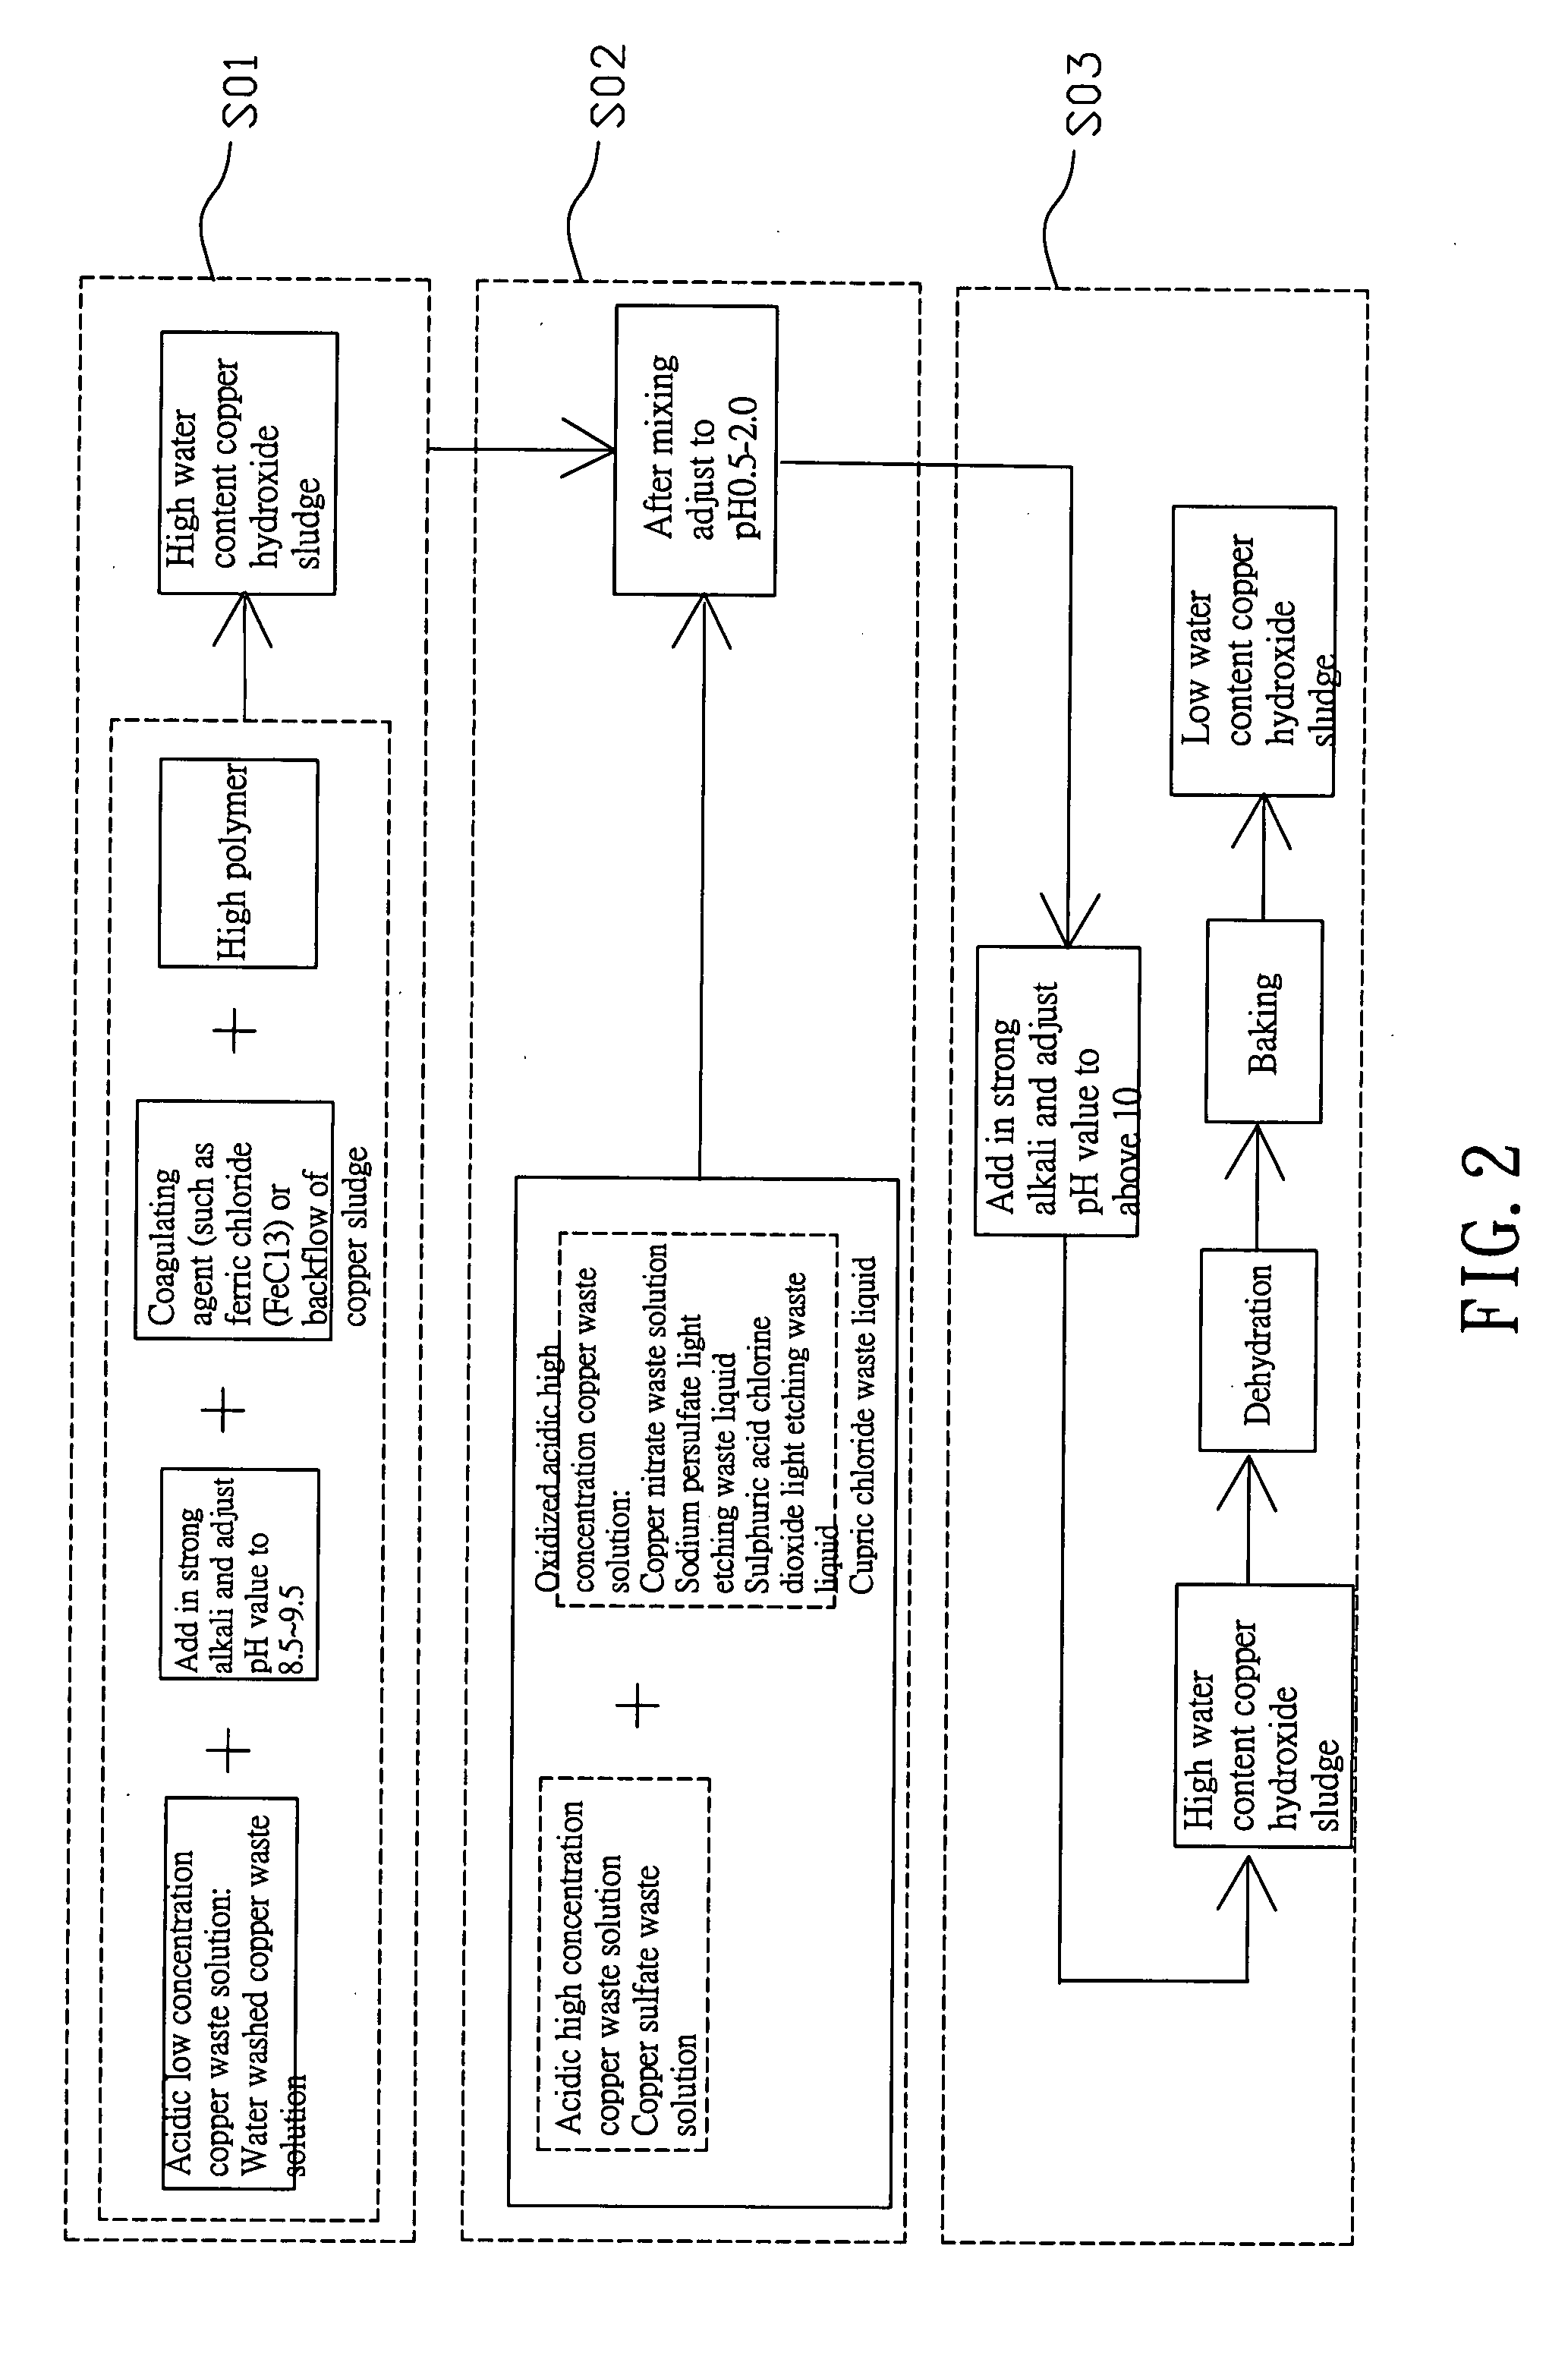 Method for processing waste copper solution/liquid to produce high copper content sludge